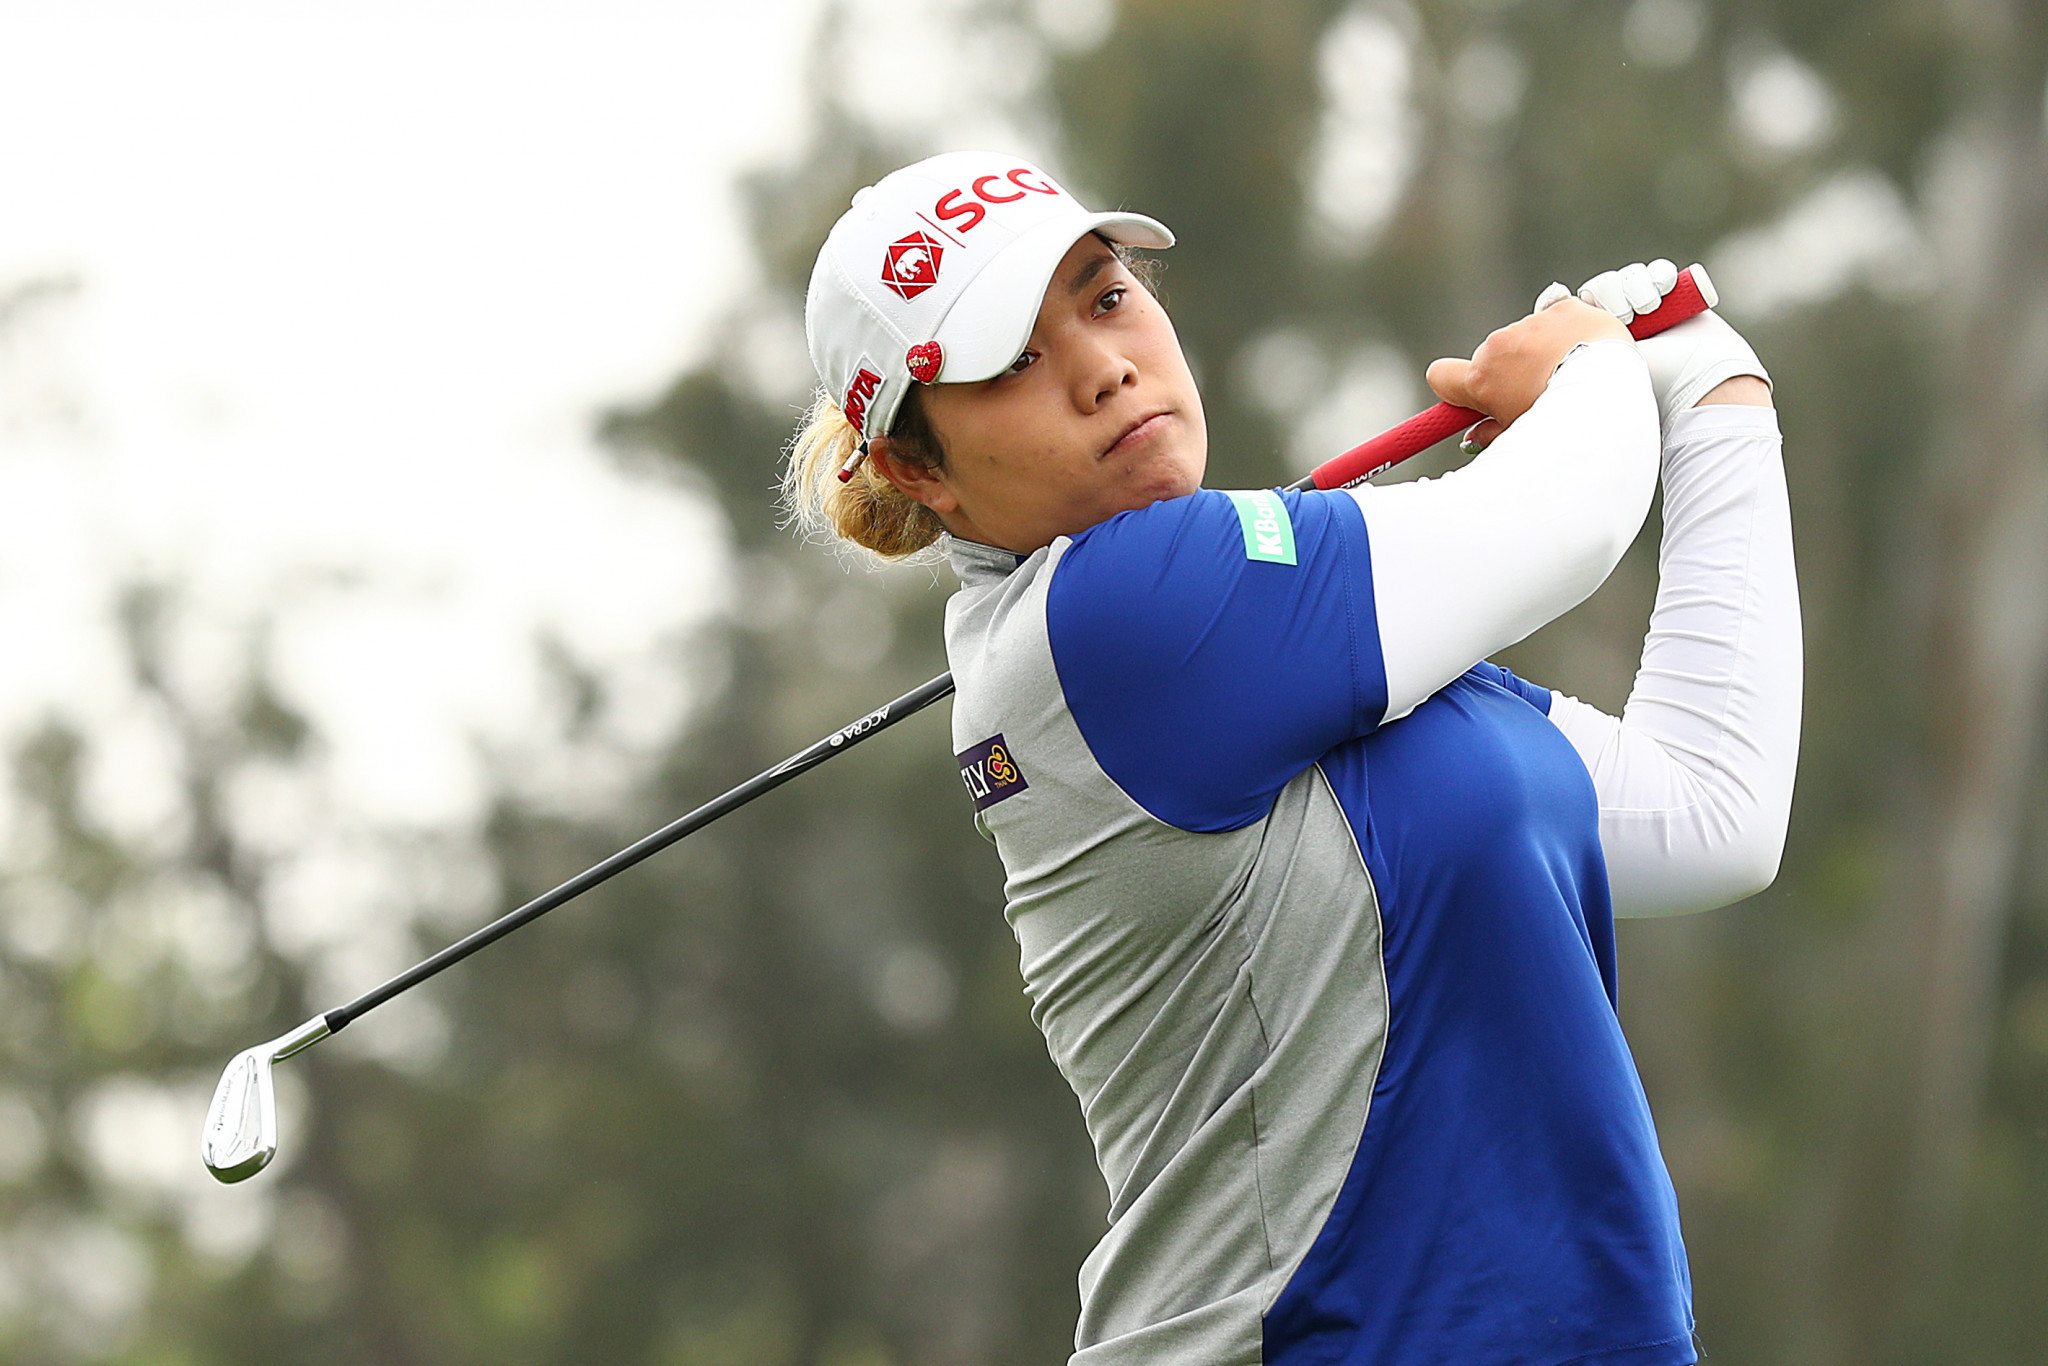 Defending champion Ariya Jutanugarn of Thailand will be among players chasing the record $1 million prize ©Getty Images